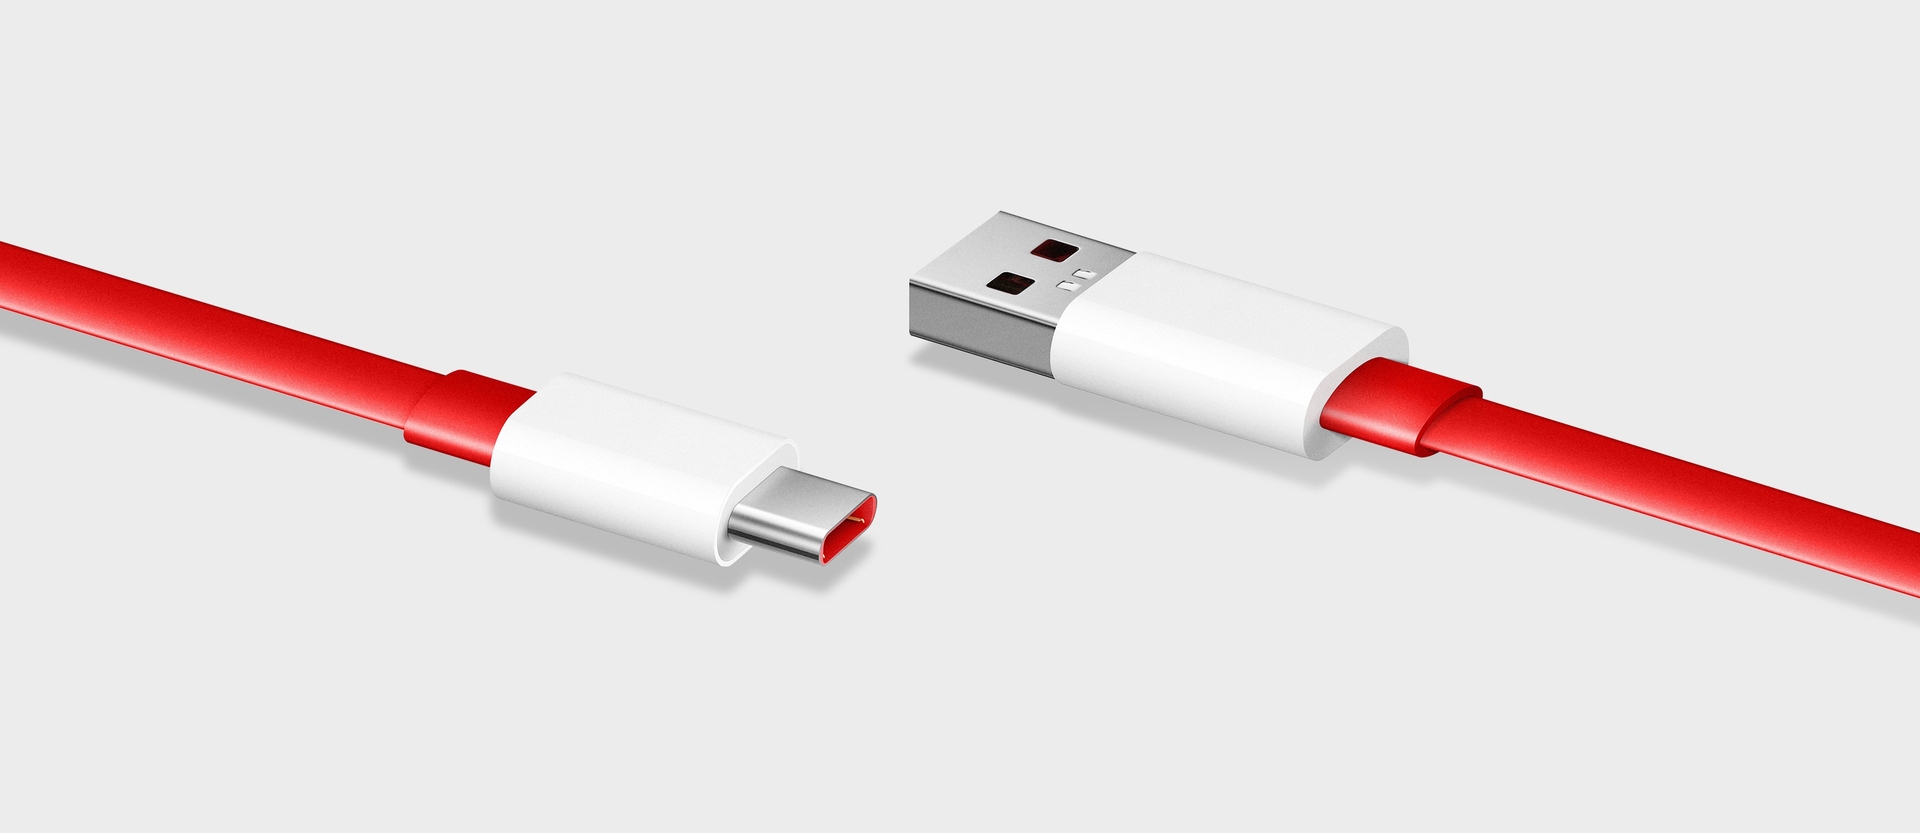 New USB Type-C logo unveiled, making it easier to identify accessory power and speed